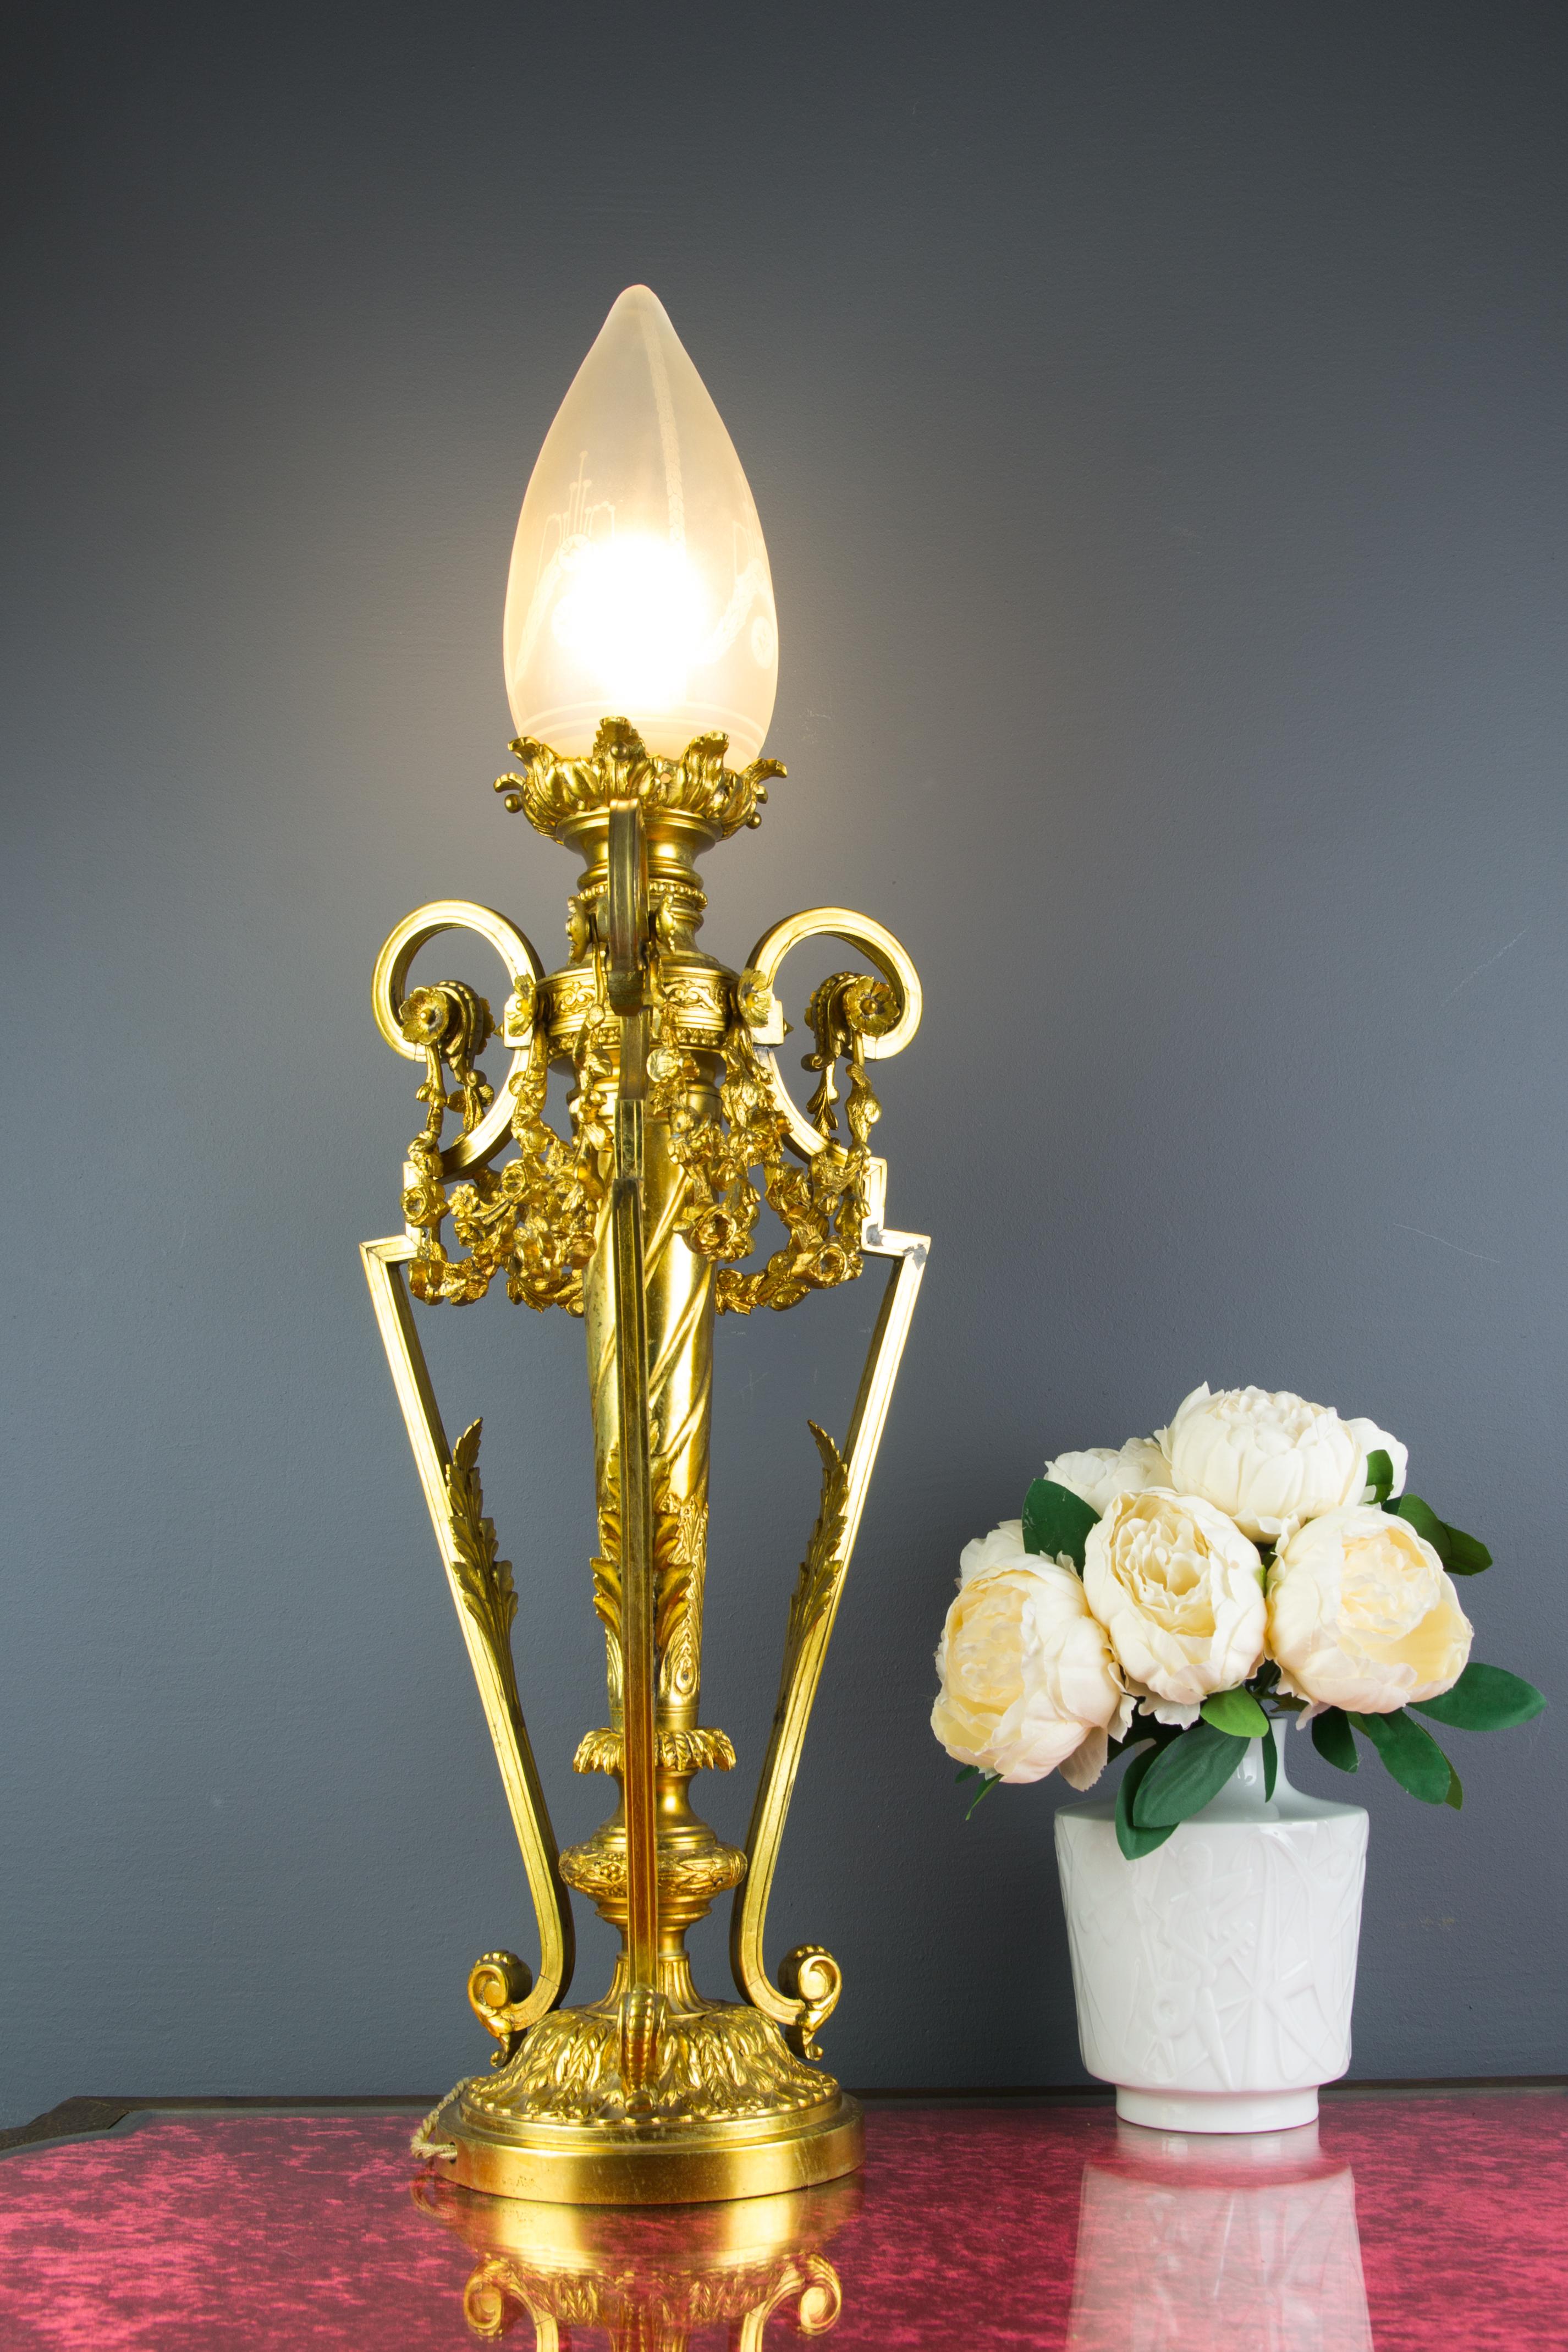 Early 20th Century French Louis XVI Style Gilt Bronze Newel Post Lamp Frosted Glass Shade